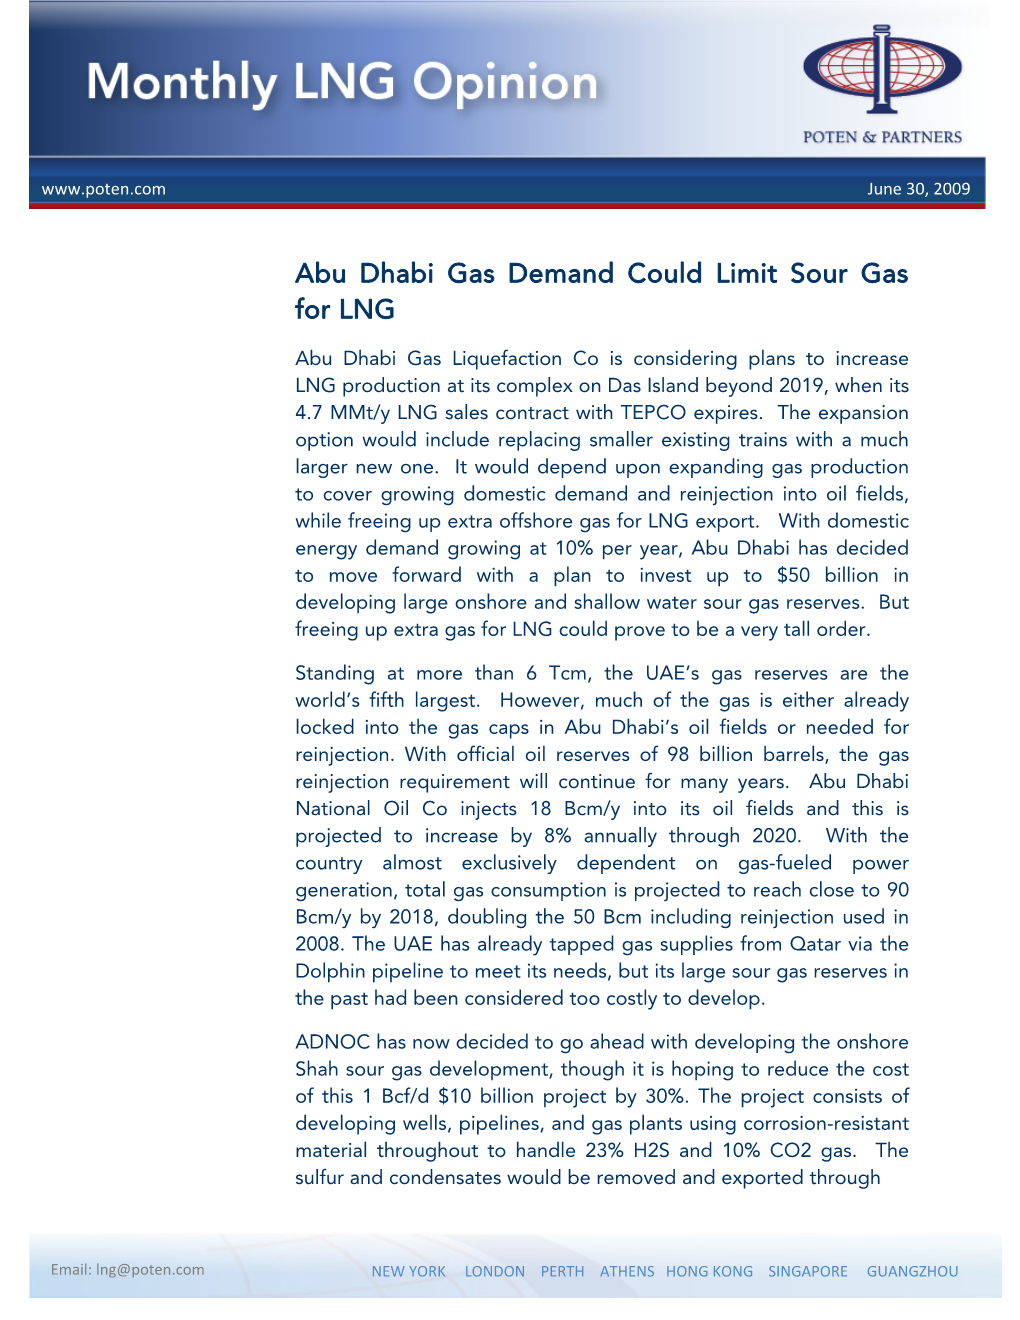 Abu Dhabi Gas Demand Could Limit Sour Gas for LNG